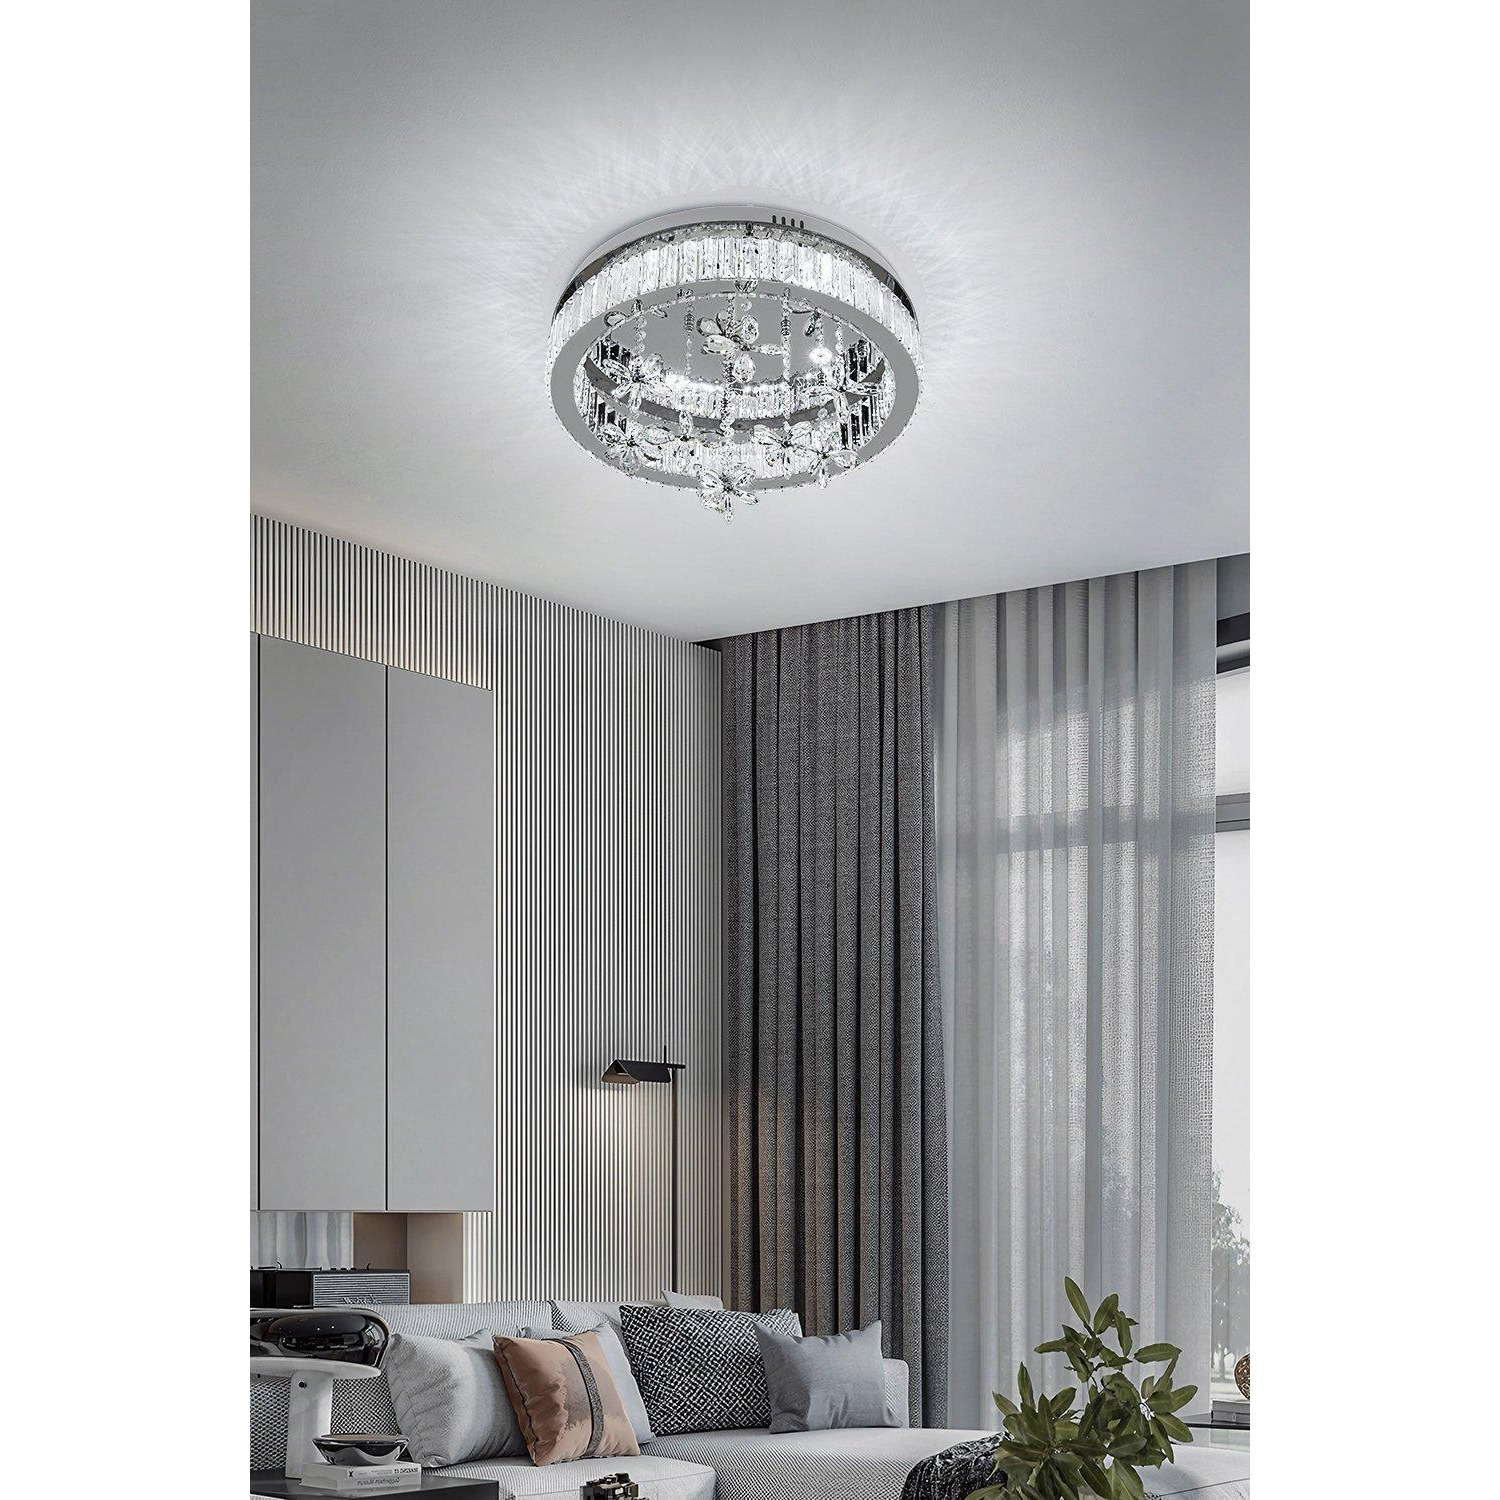 Modern Round Crystal Celling Light with Crystal Pendant - image 1